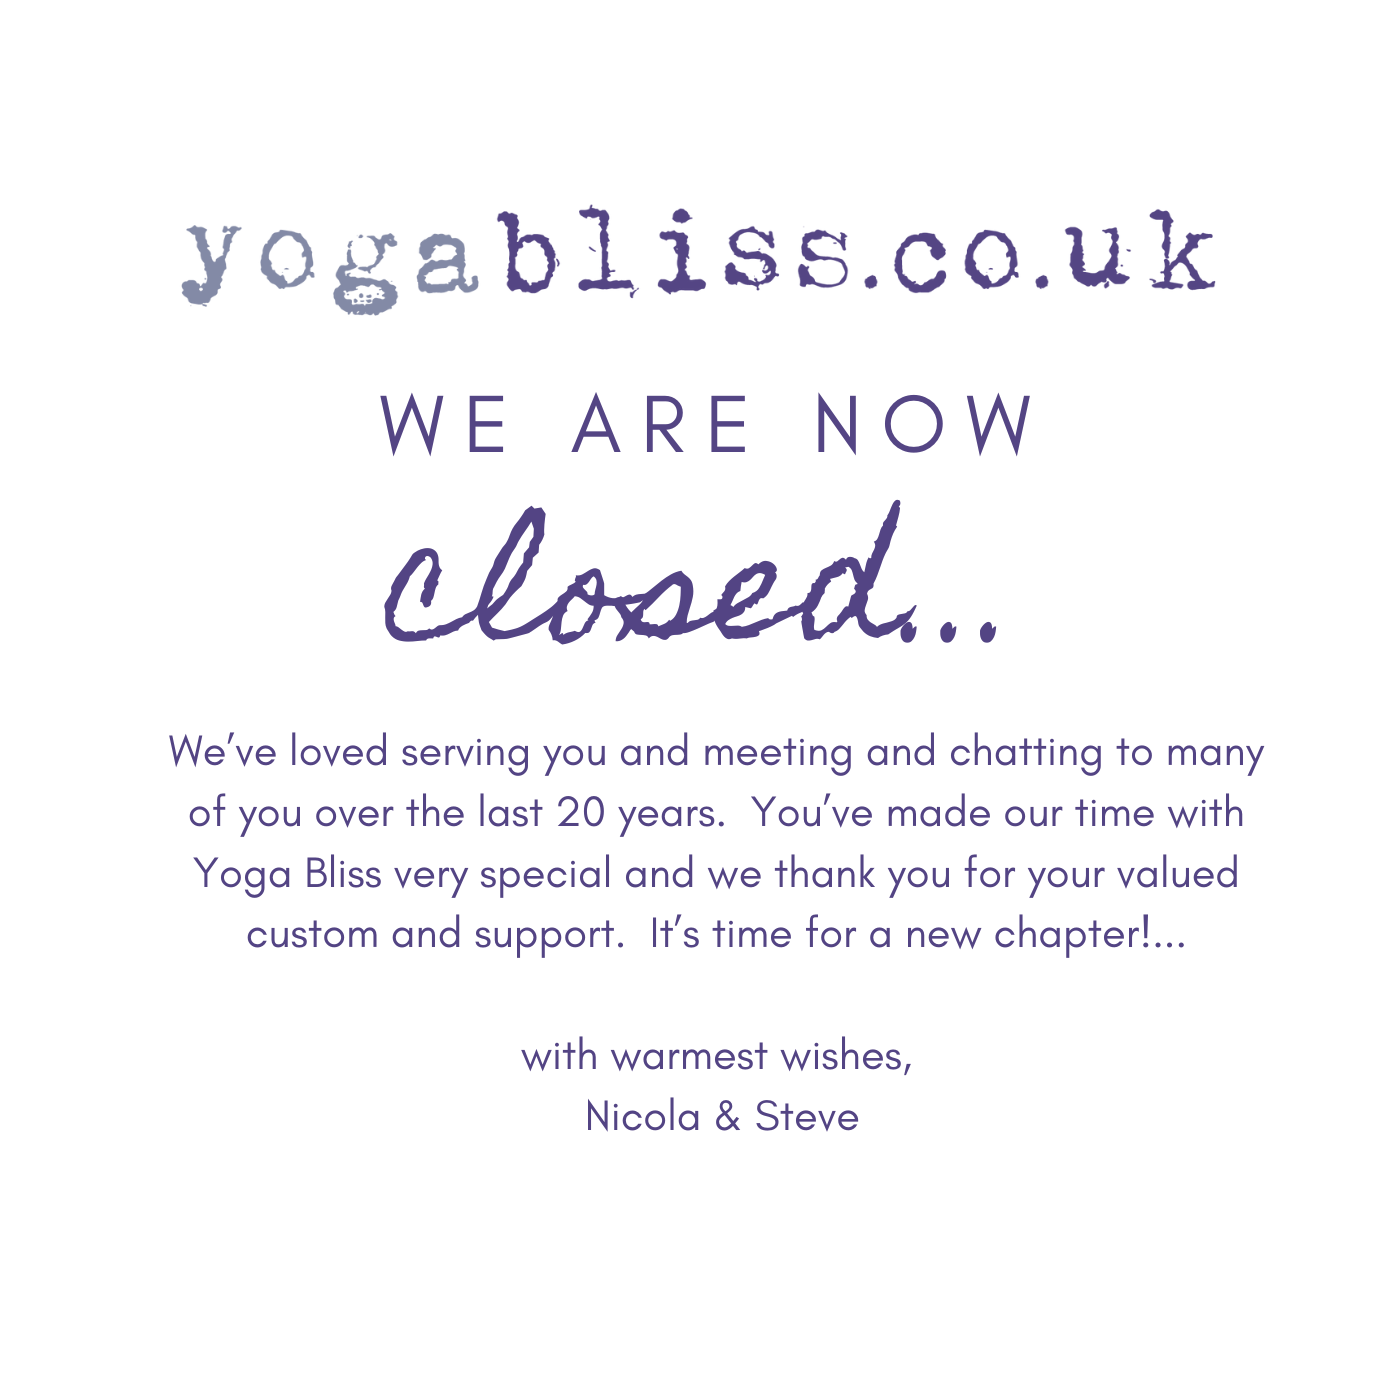 yogabliss is now closed